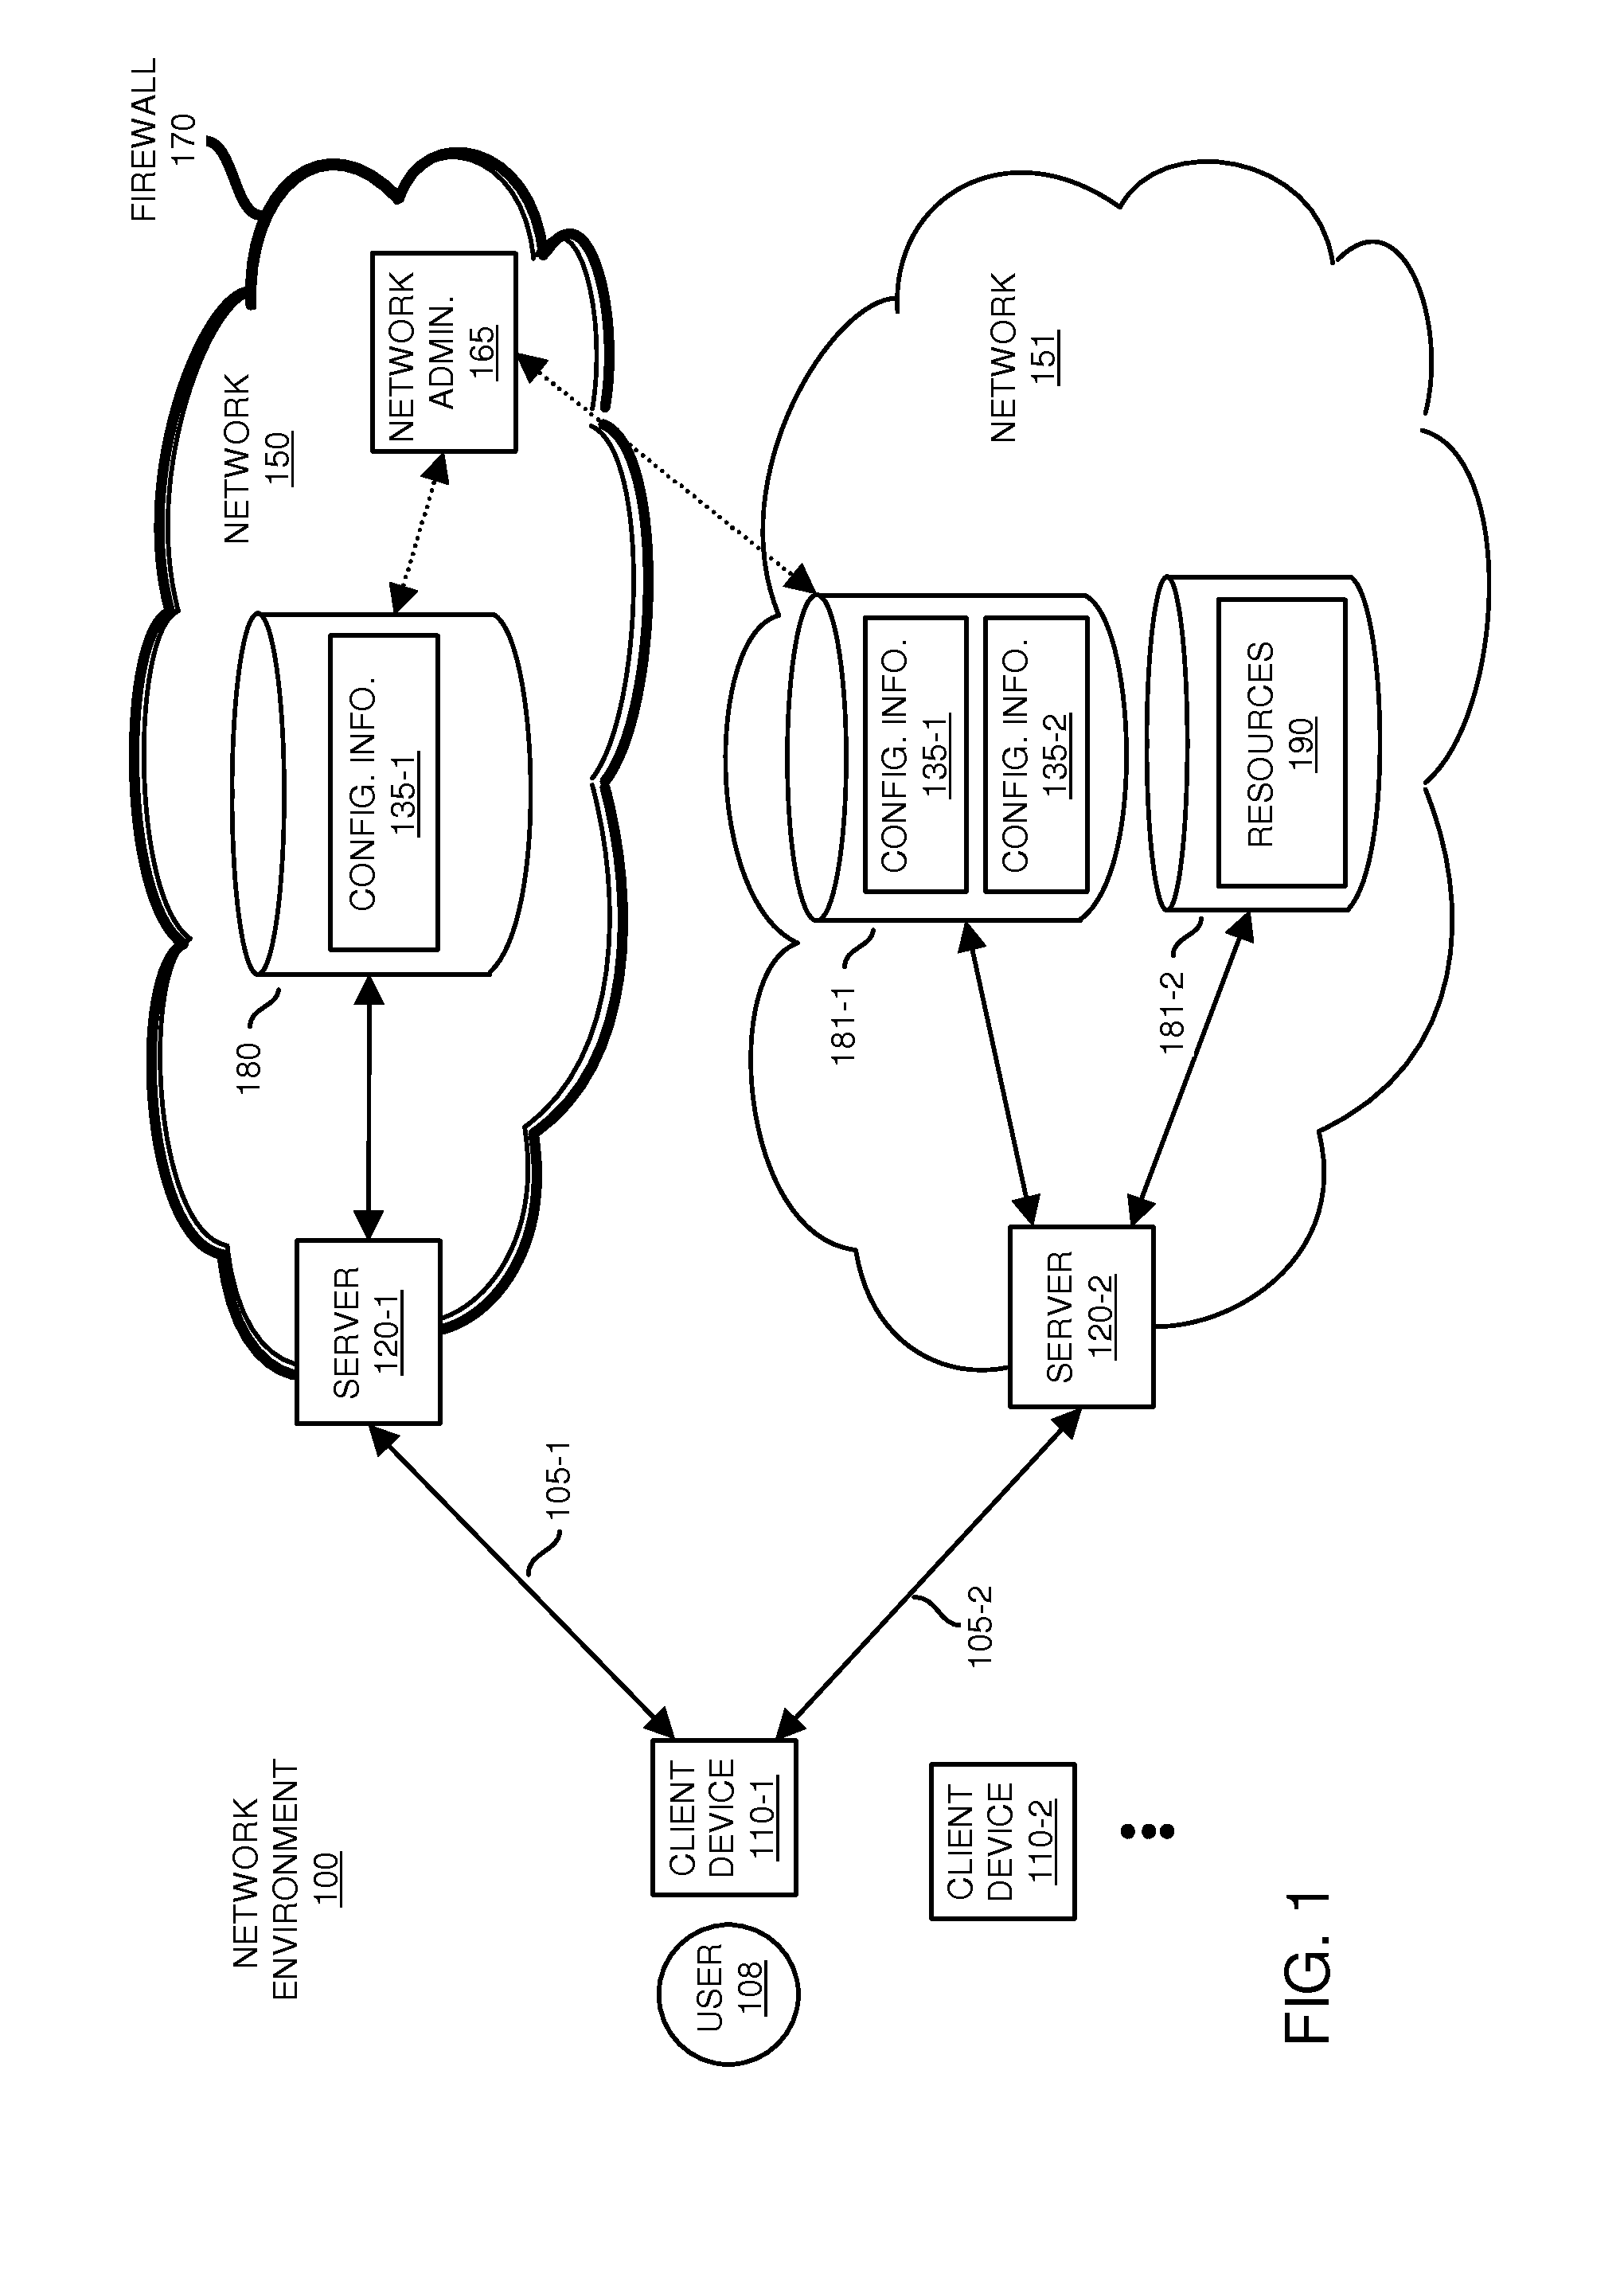 Conveyance of configuration information in a network